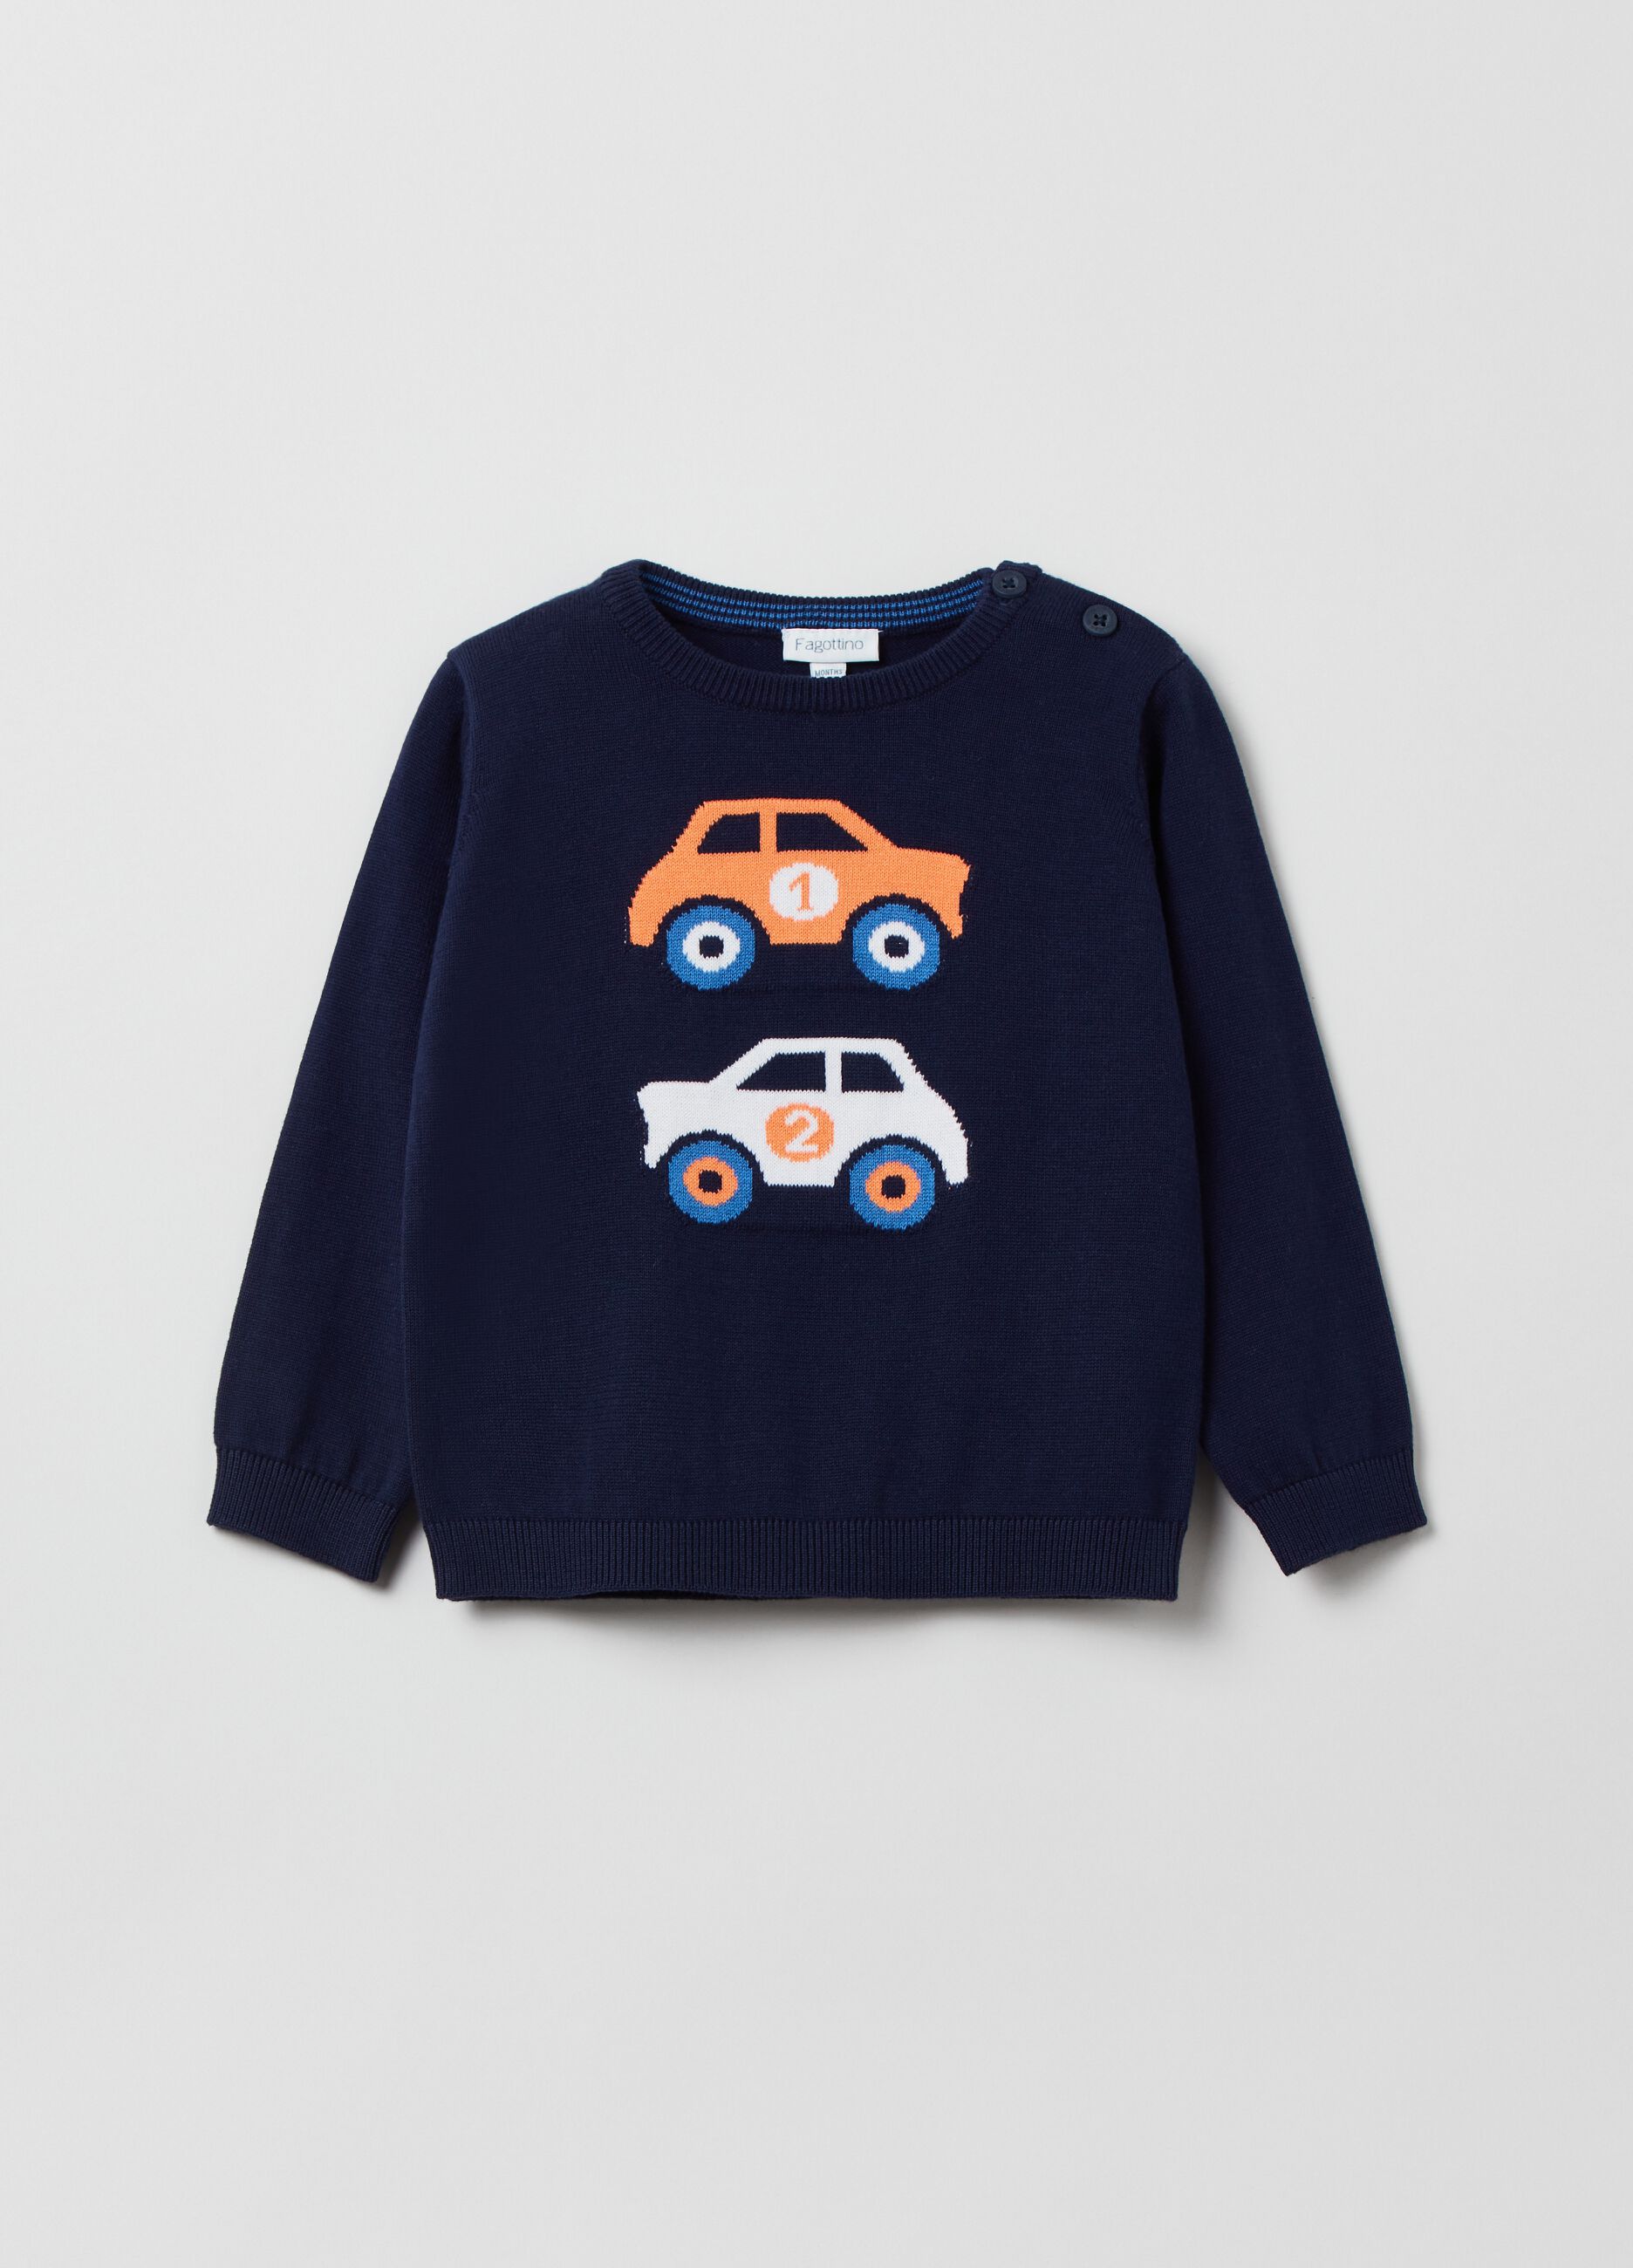 Cotton pullover with toy cars design